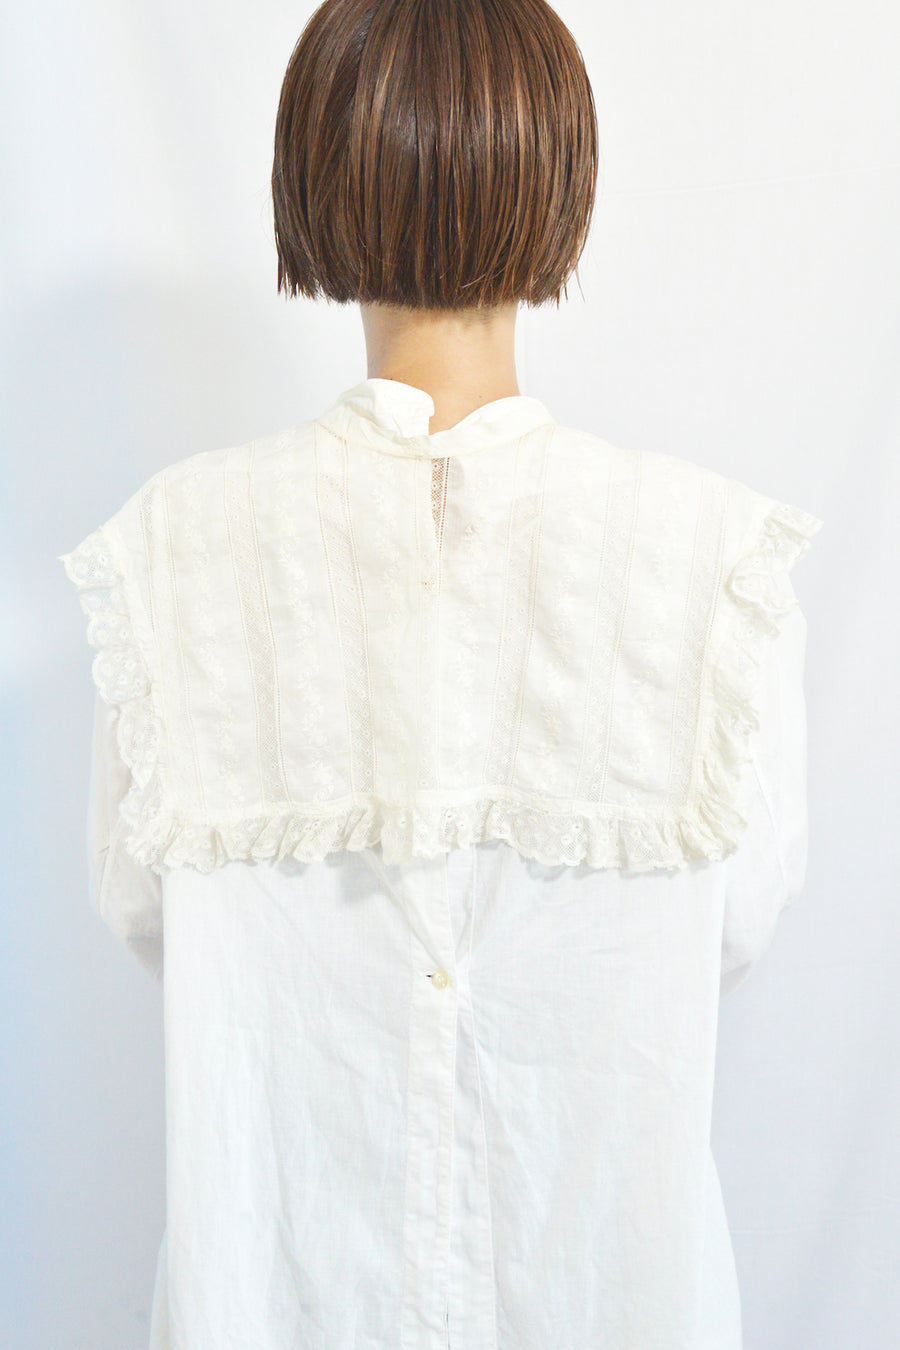 Vintage 1900's 〜10's Victorian LAce and Embroidred collar